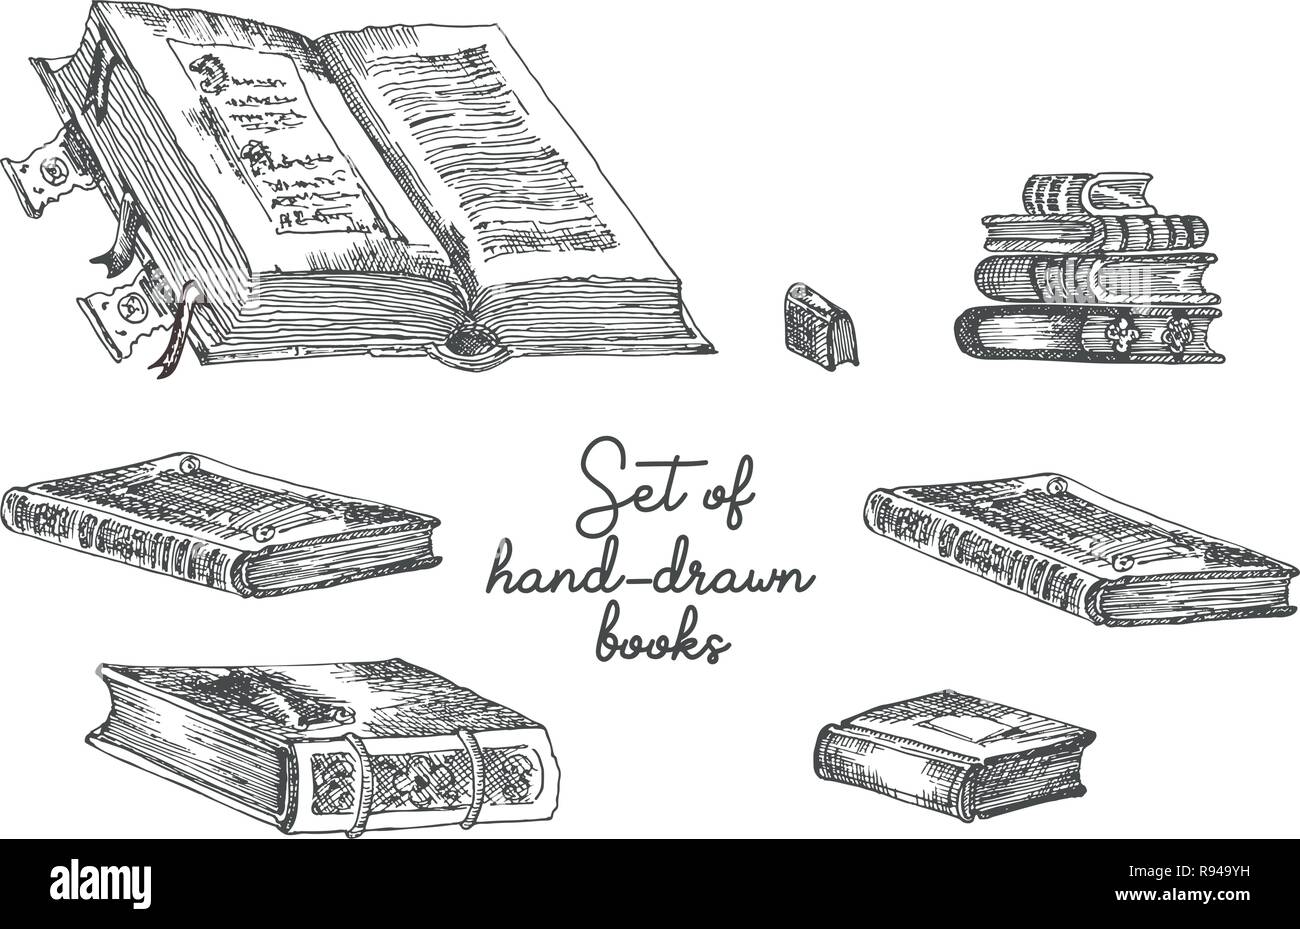 Books Engraving Vintage Open Book Engrave Sketch Drawn Hand